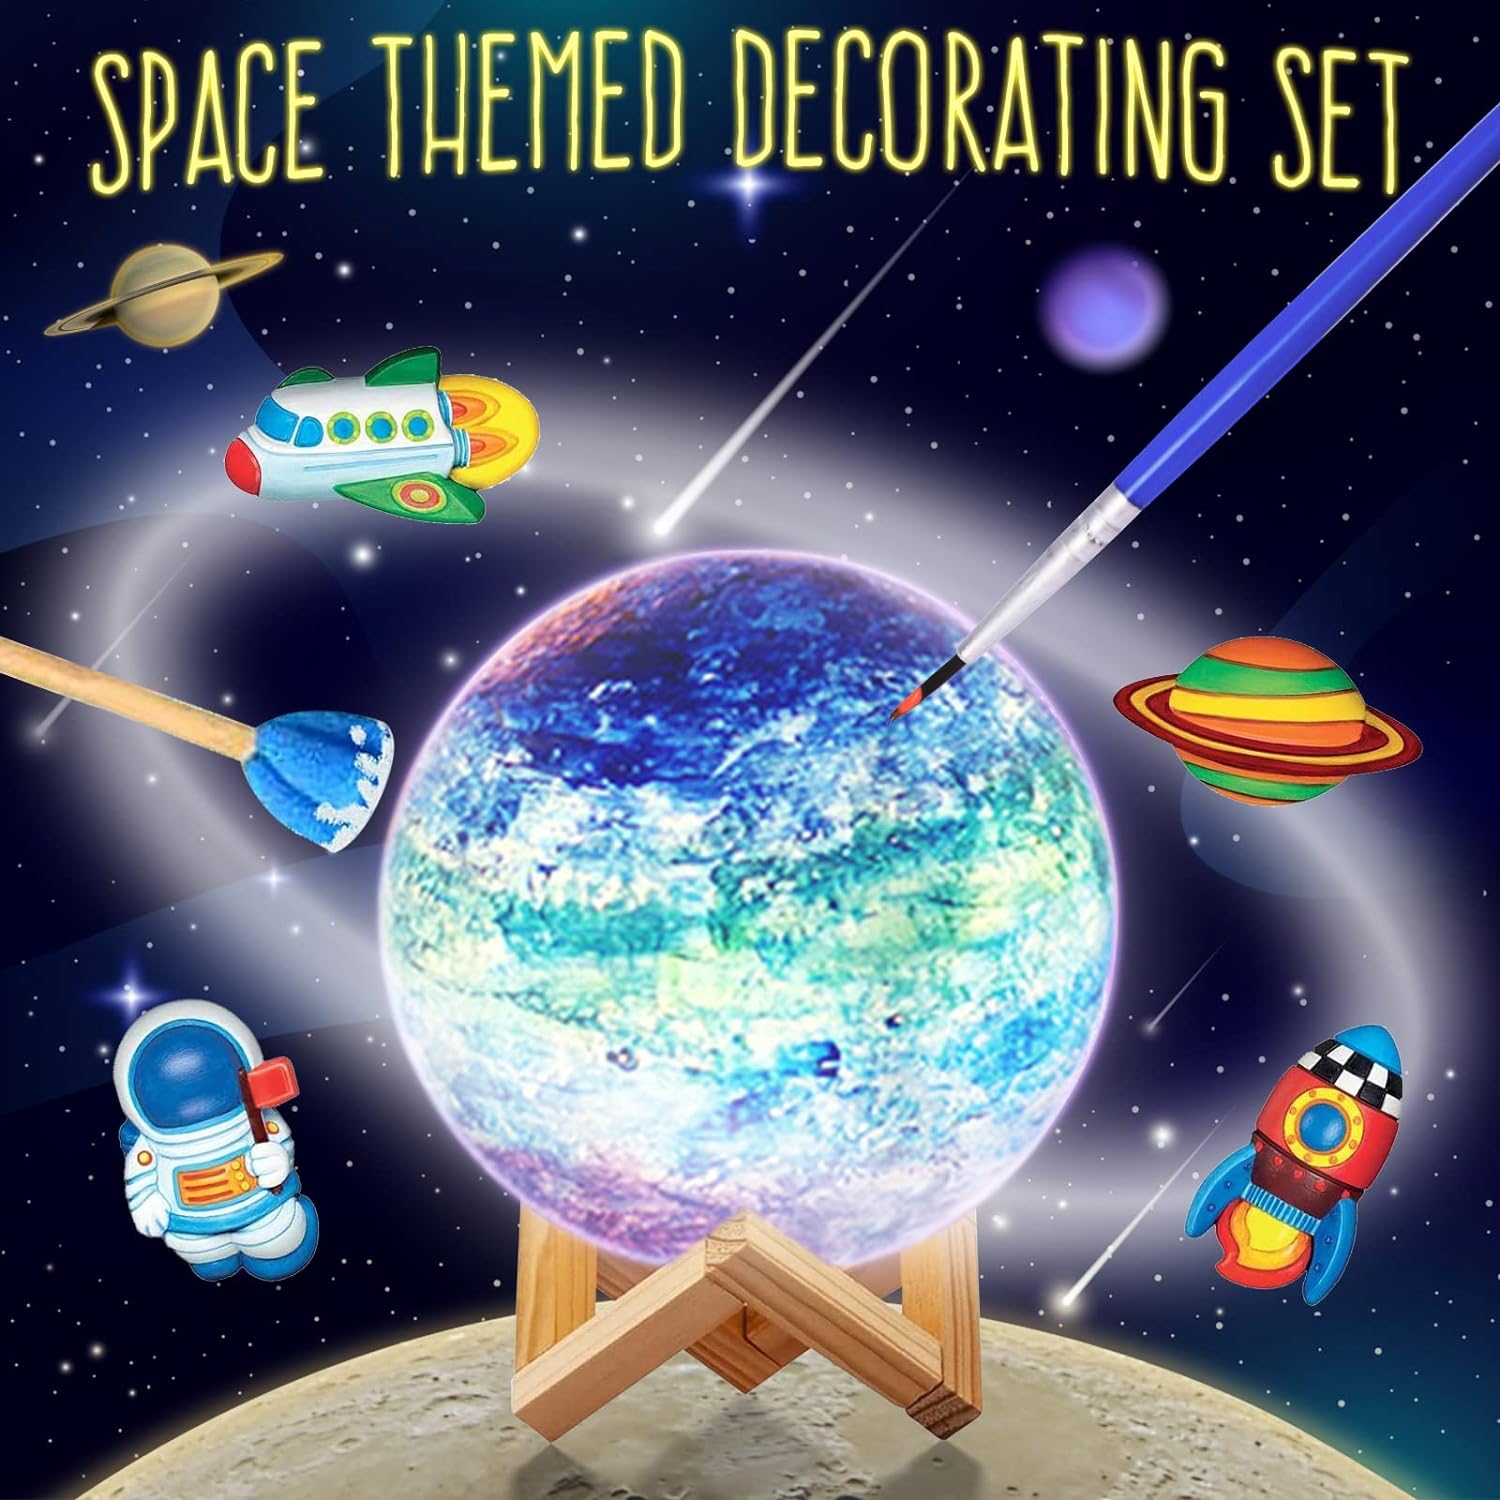 Paint Your Own Moon Lamp Kit, Christmas Gifts DIY Space Moon Night Light, Art Supplies Arts & Crafts Kit, Arts and Crafts for Kids Ages 8-12, Toys Girls Boy Birthday Gift Ages 3 4 5 6 7 8 9 10 11 12+